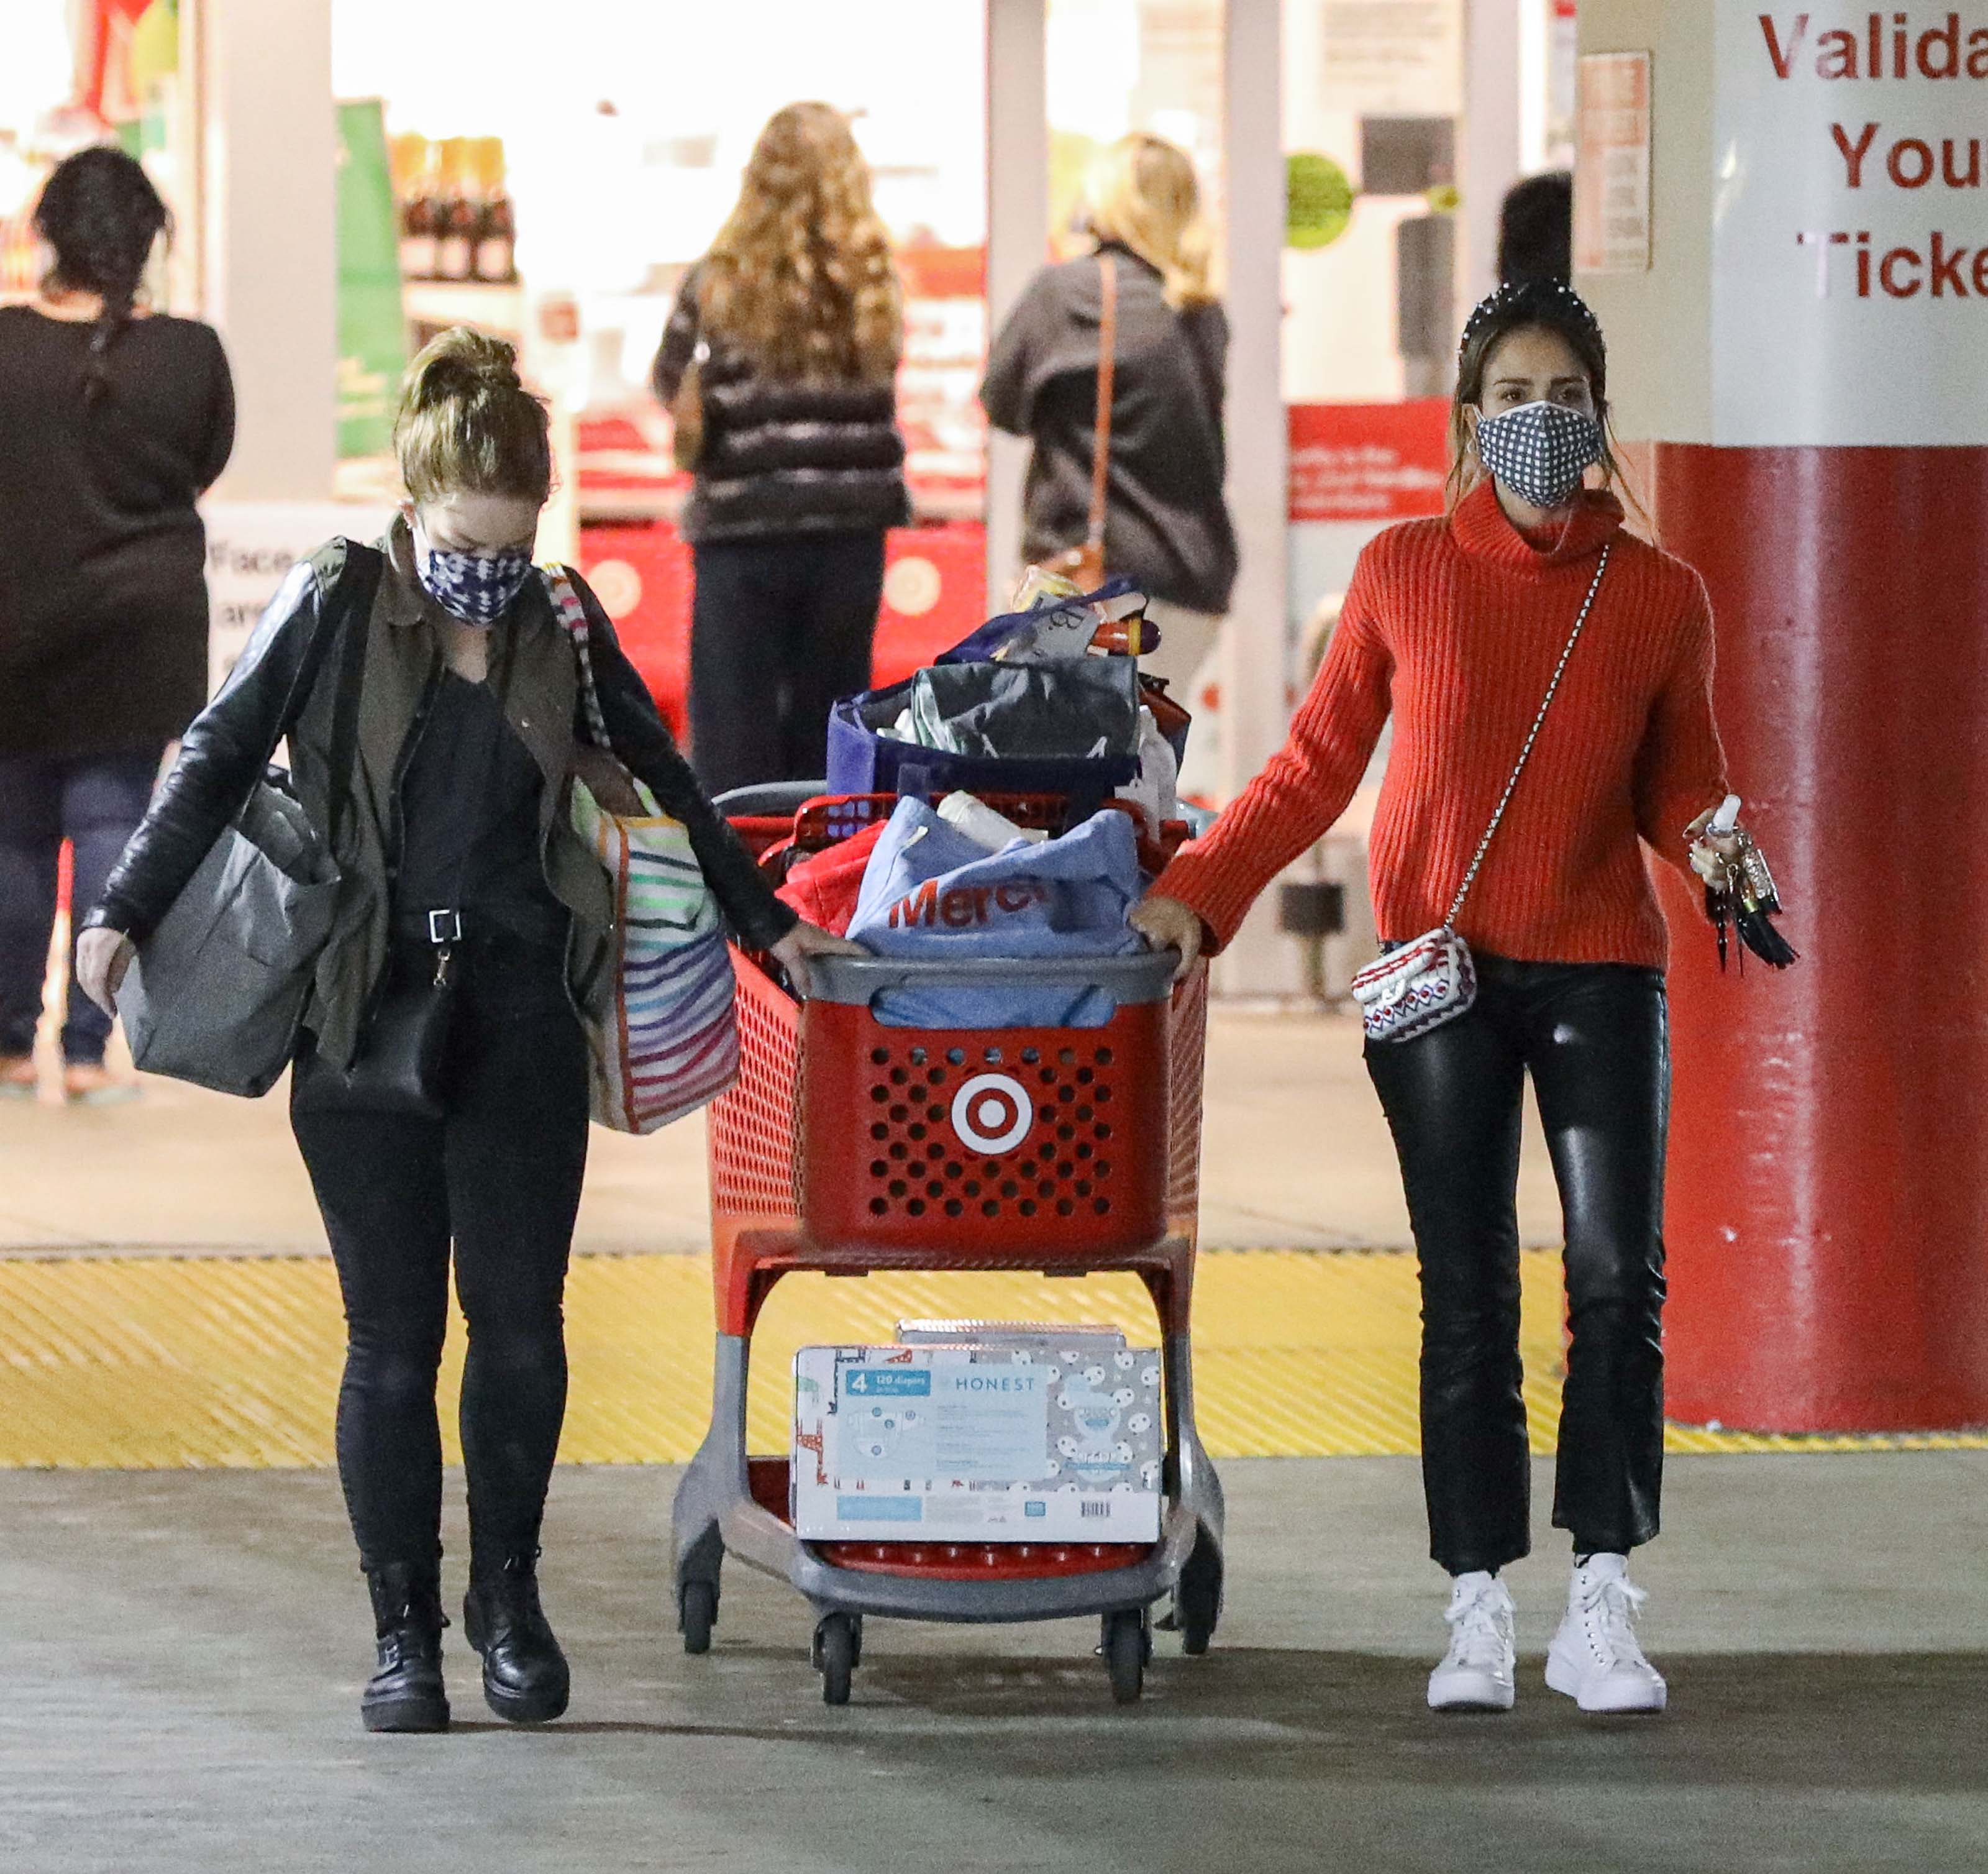 Jessica Alba seen at Christmas shopping at Target discount store in Hollywood